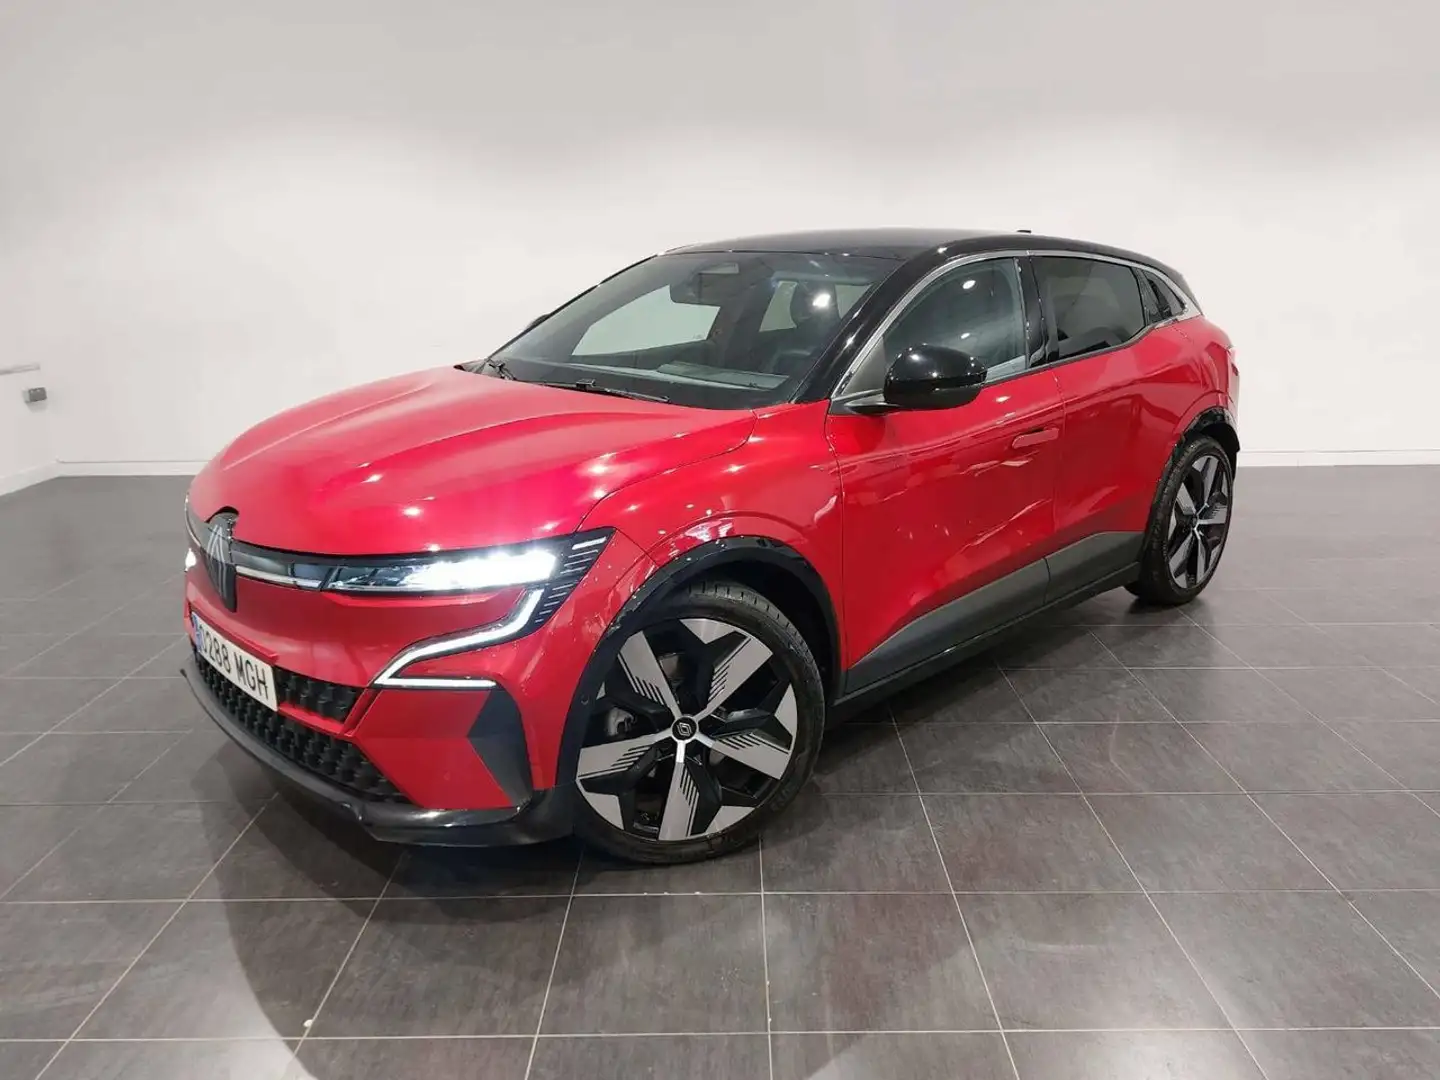 Renault Megane E-Tech Equilibre Standard Charge EV40 96kW Rosso - 1